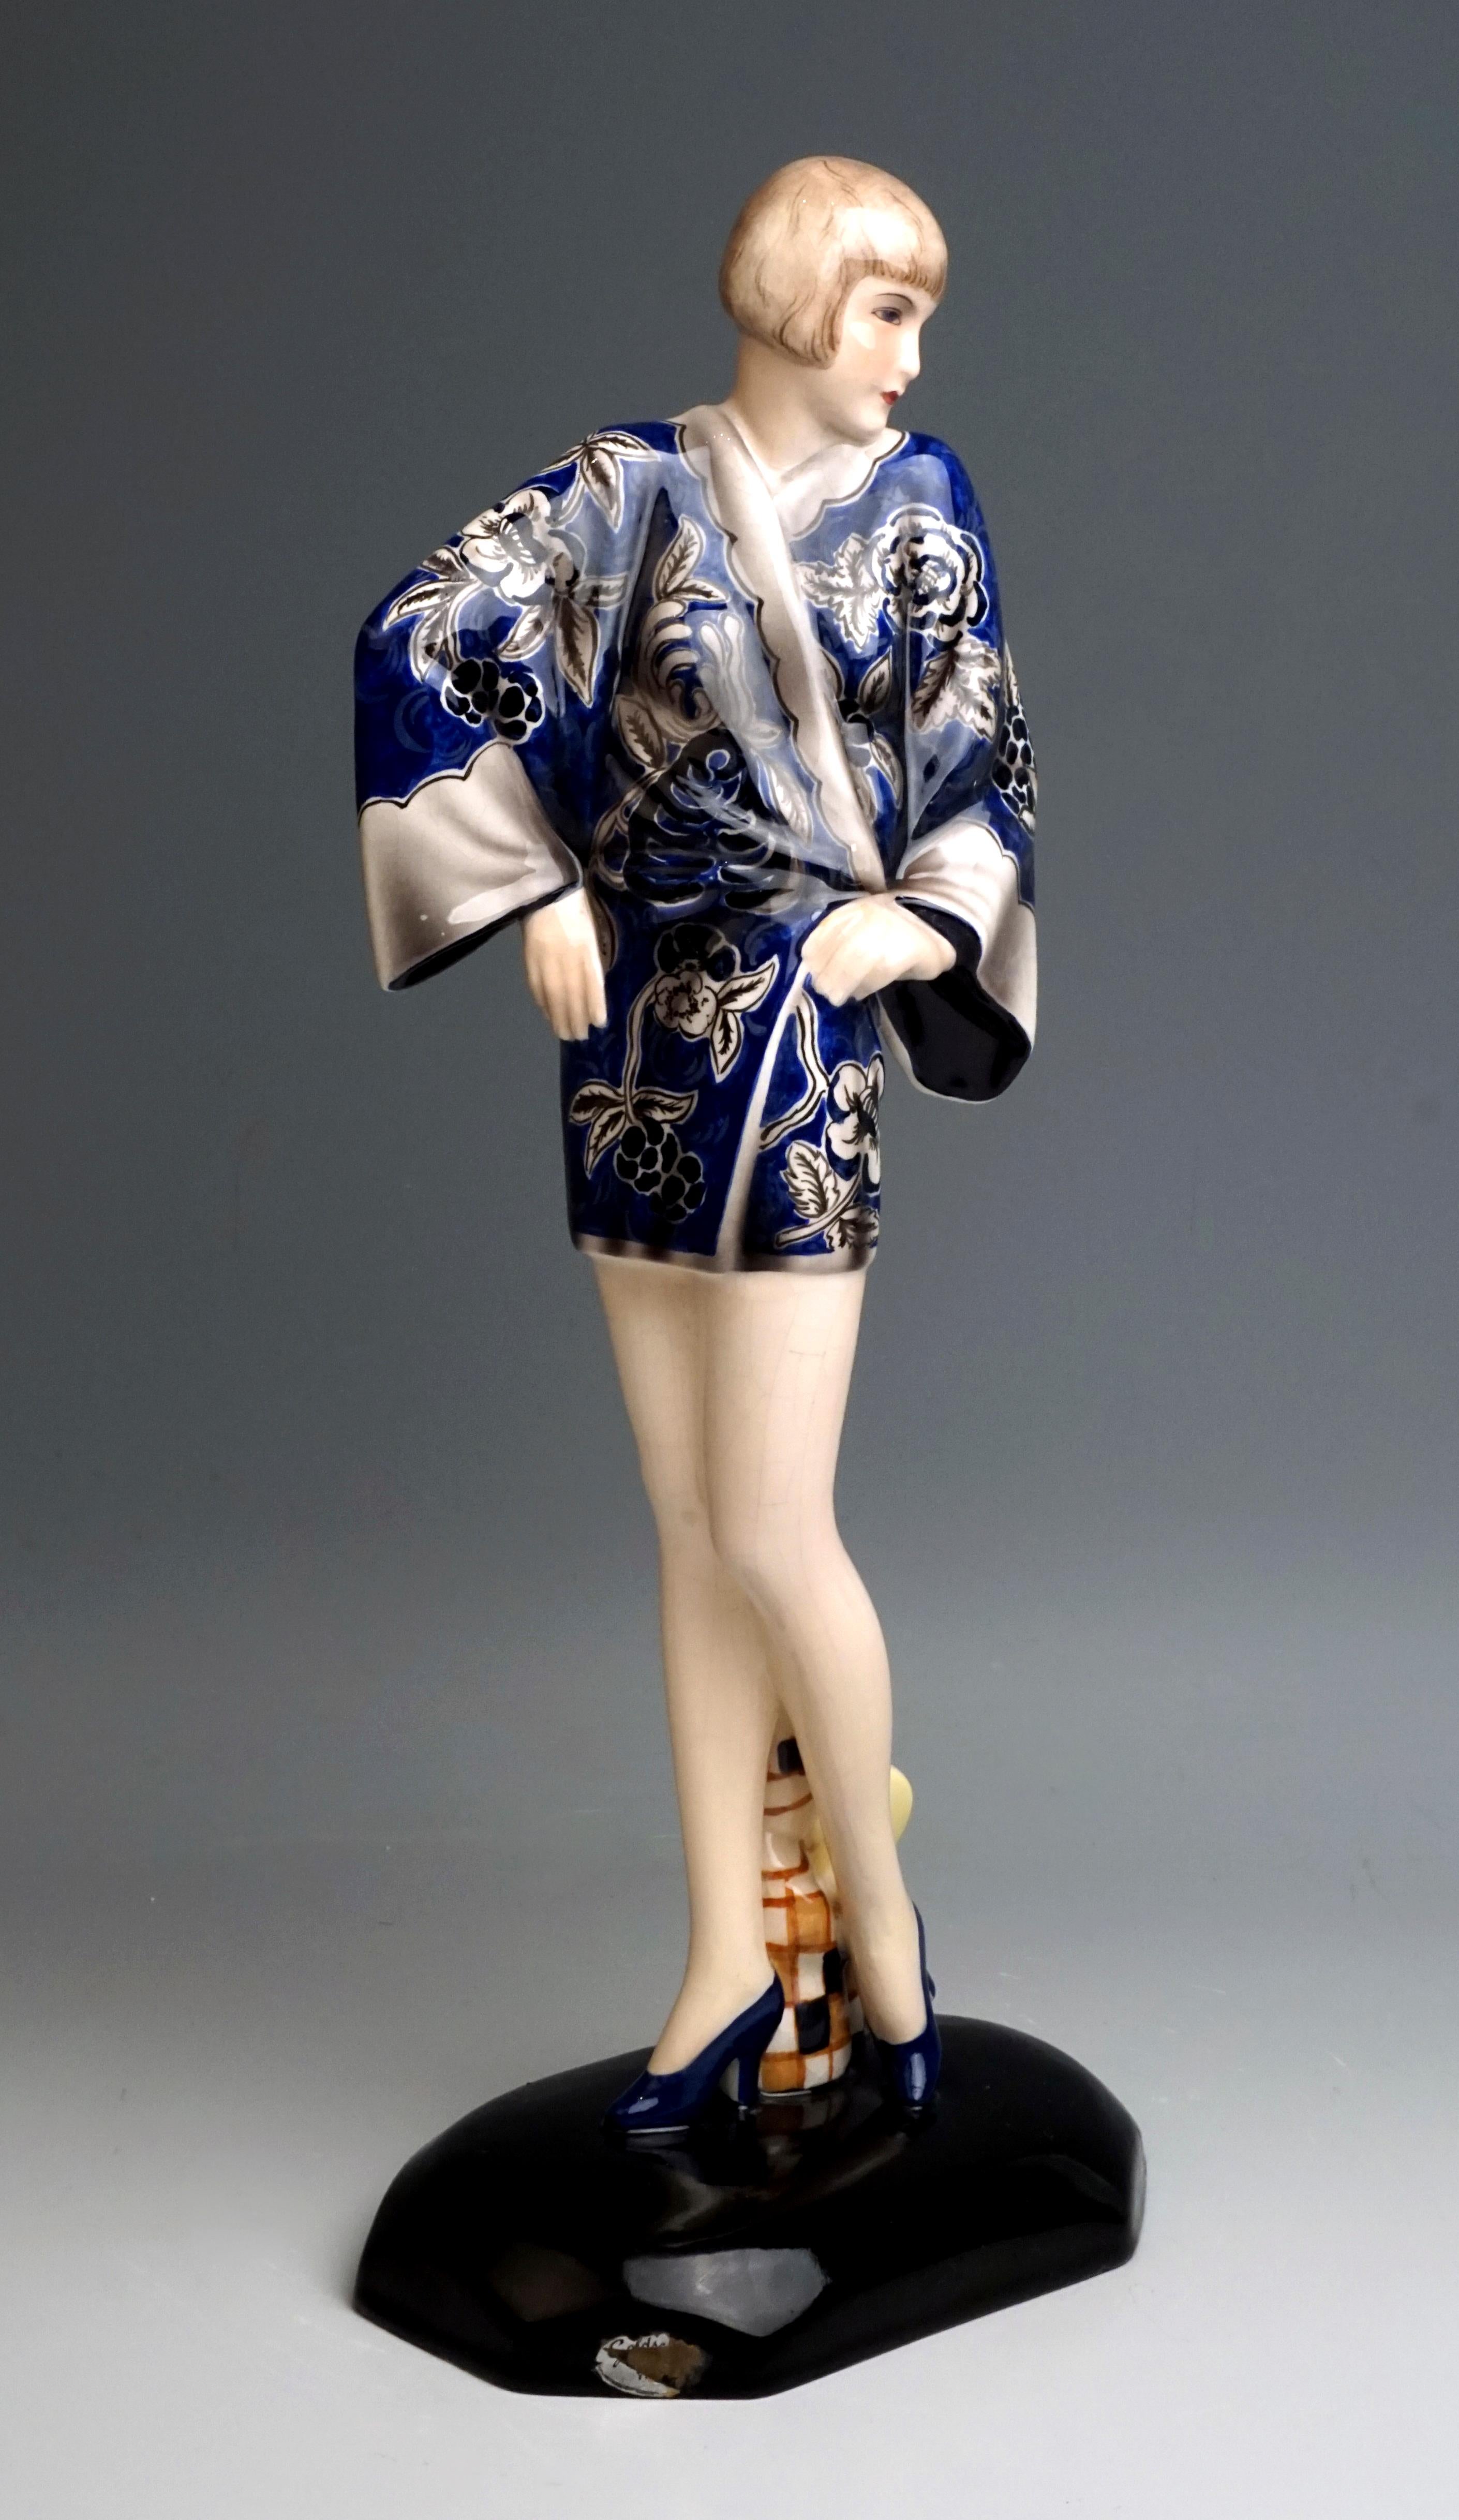 Rare Goldscheider figurine of the 1930s

Young blonde lady with bob hairstyle standing upright, torso turned to the left and supporting both arms on the hips, in a short blue kimono with a floral pattern and high heels. Behind her between her legs